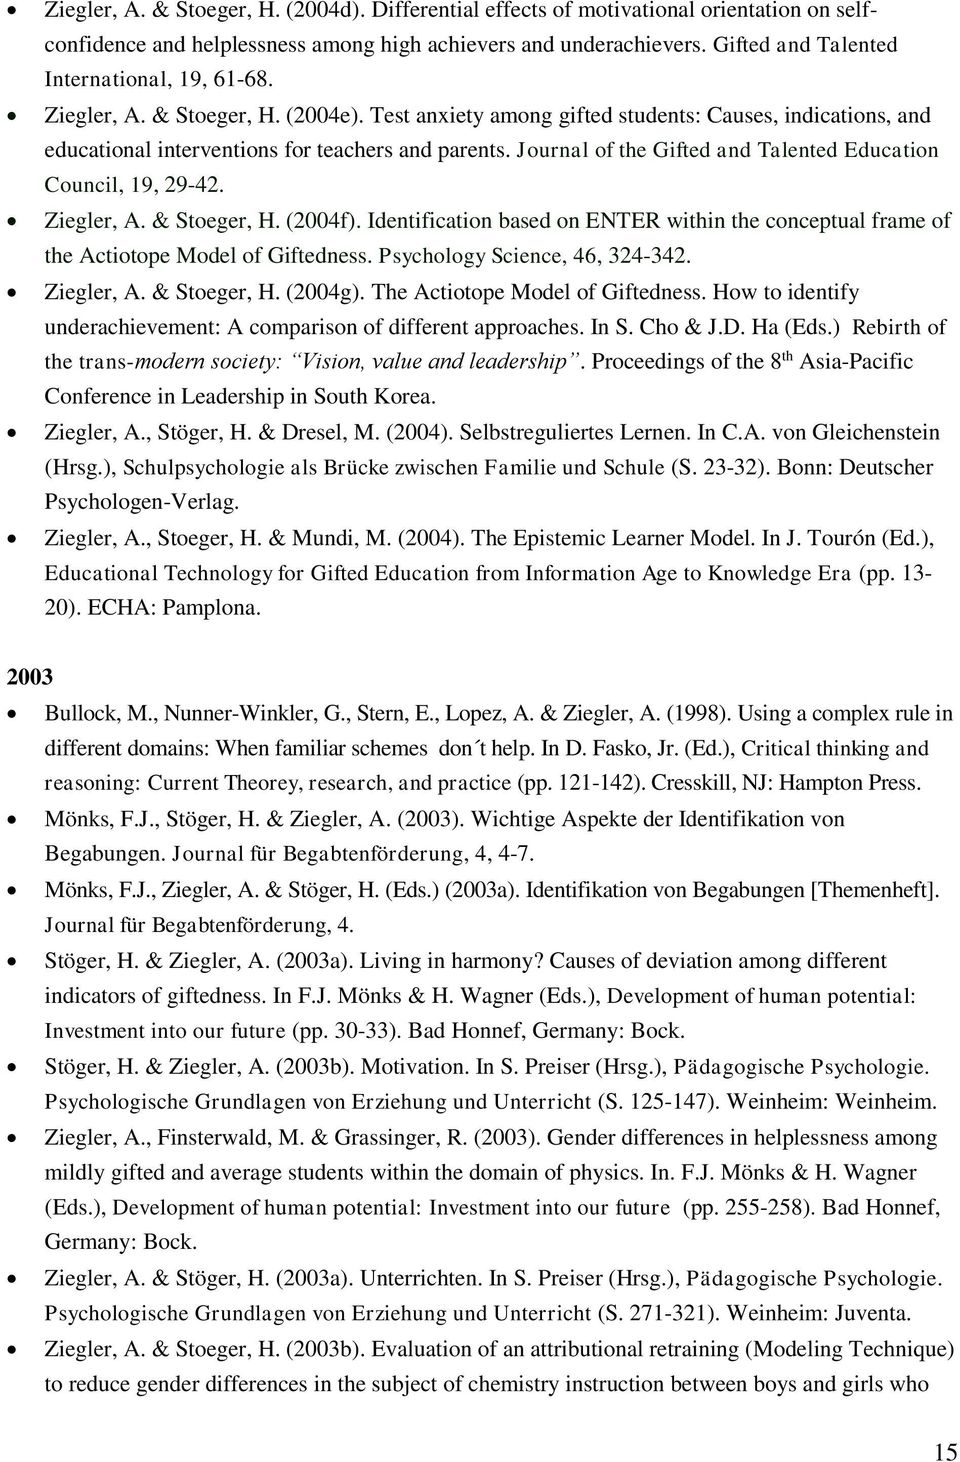 Journal of the Gifted and Talented Education Council, 19, 29-42. Ziegler, A. & Stoeger, H. (2004f). Identification based on ENTER within the conceptual frame of the Actiotope Model of Giftedness.